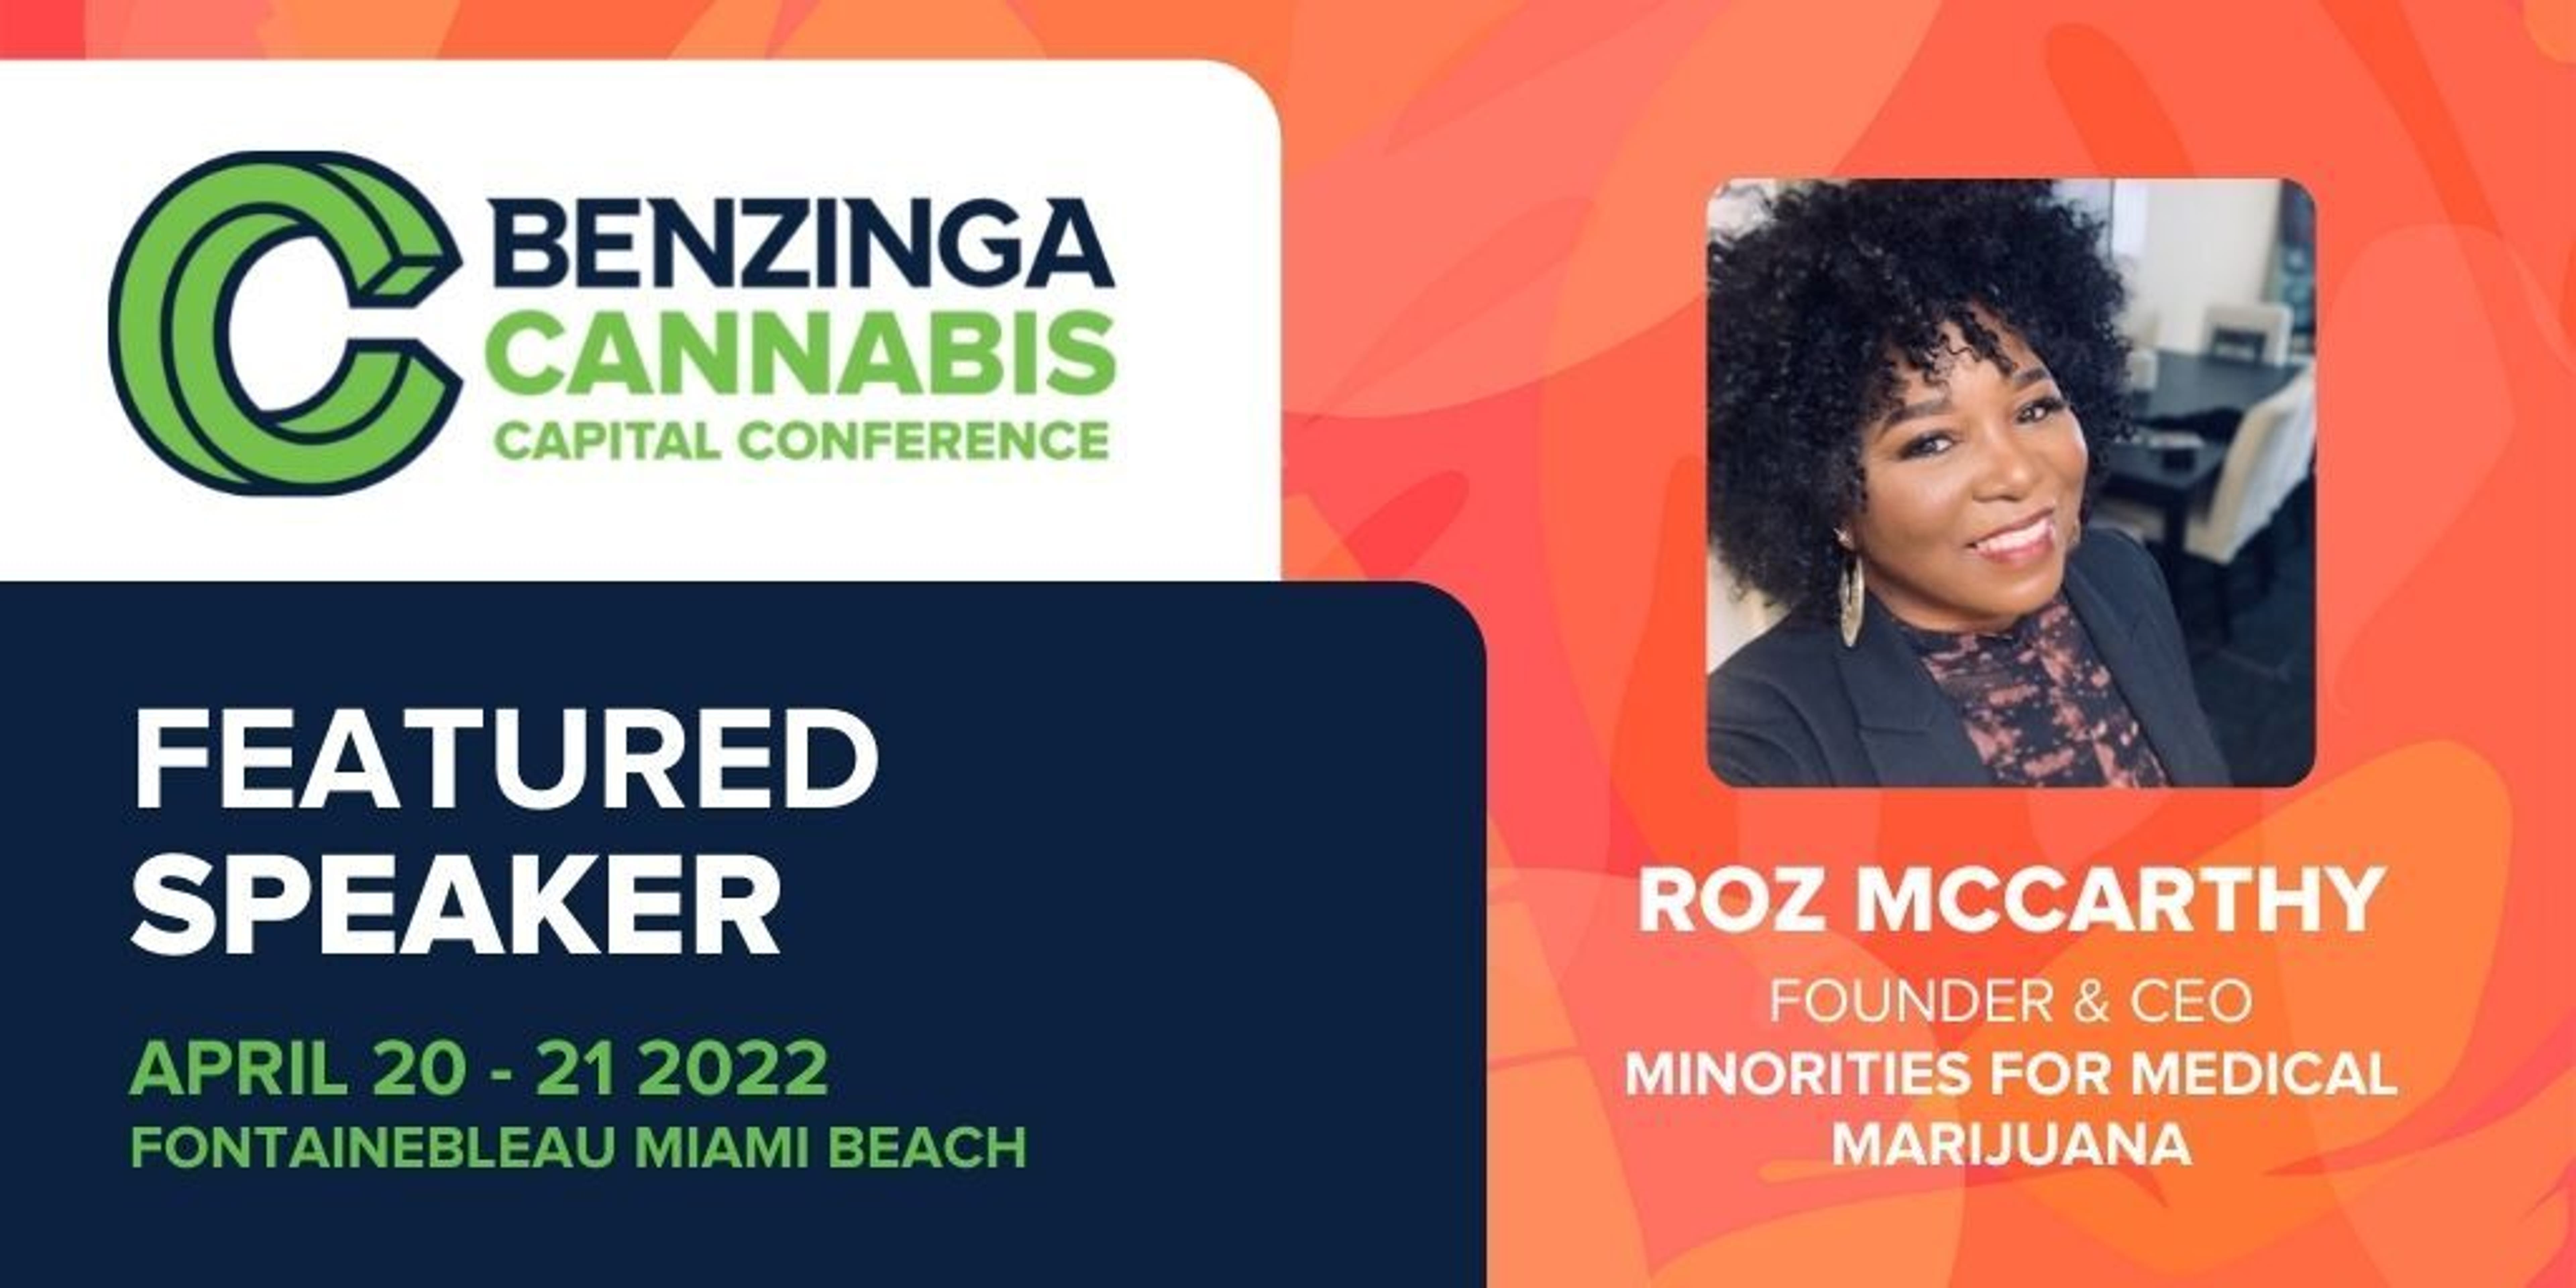 Corporate America To American Cannabis, Roz McCarthy: Meet Our Featured Speaker